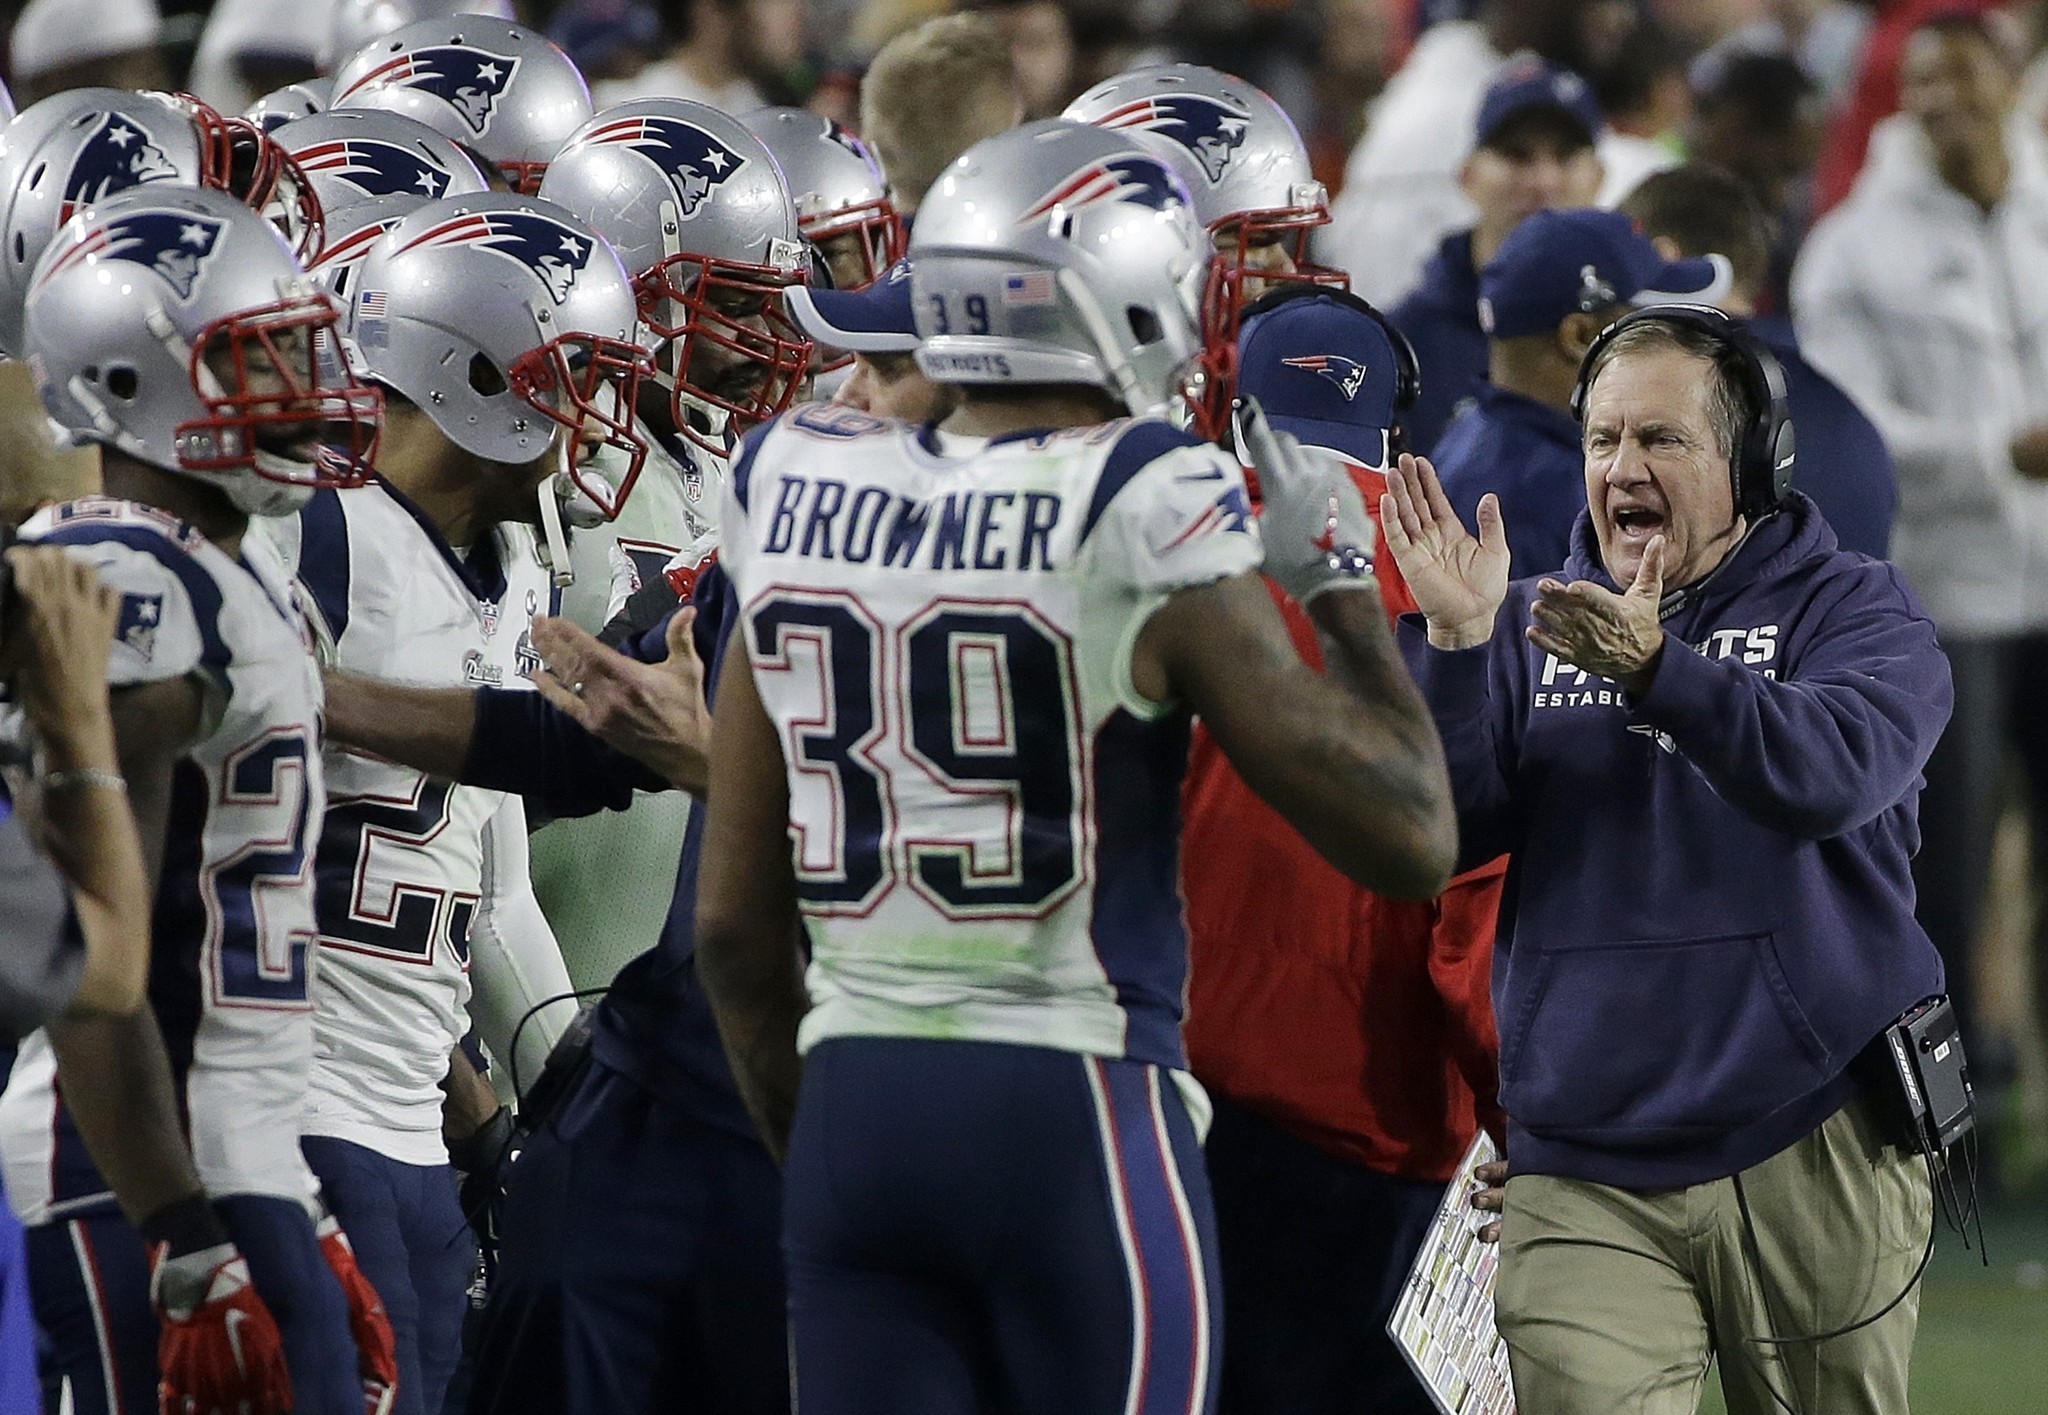 Daily Czabe: The Patriots Are A Cult, Not A Football Team